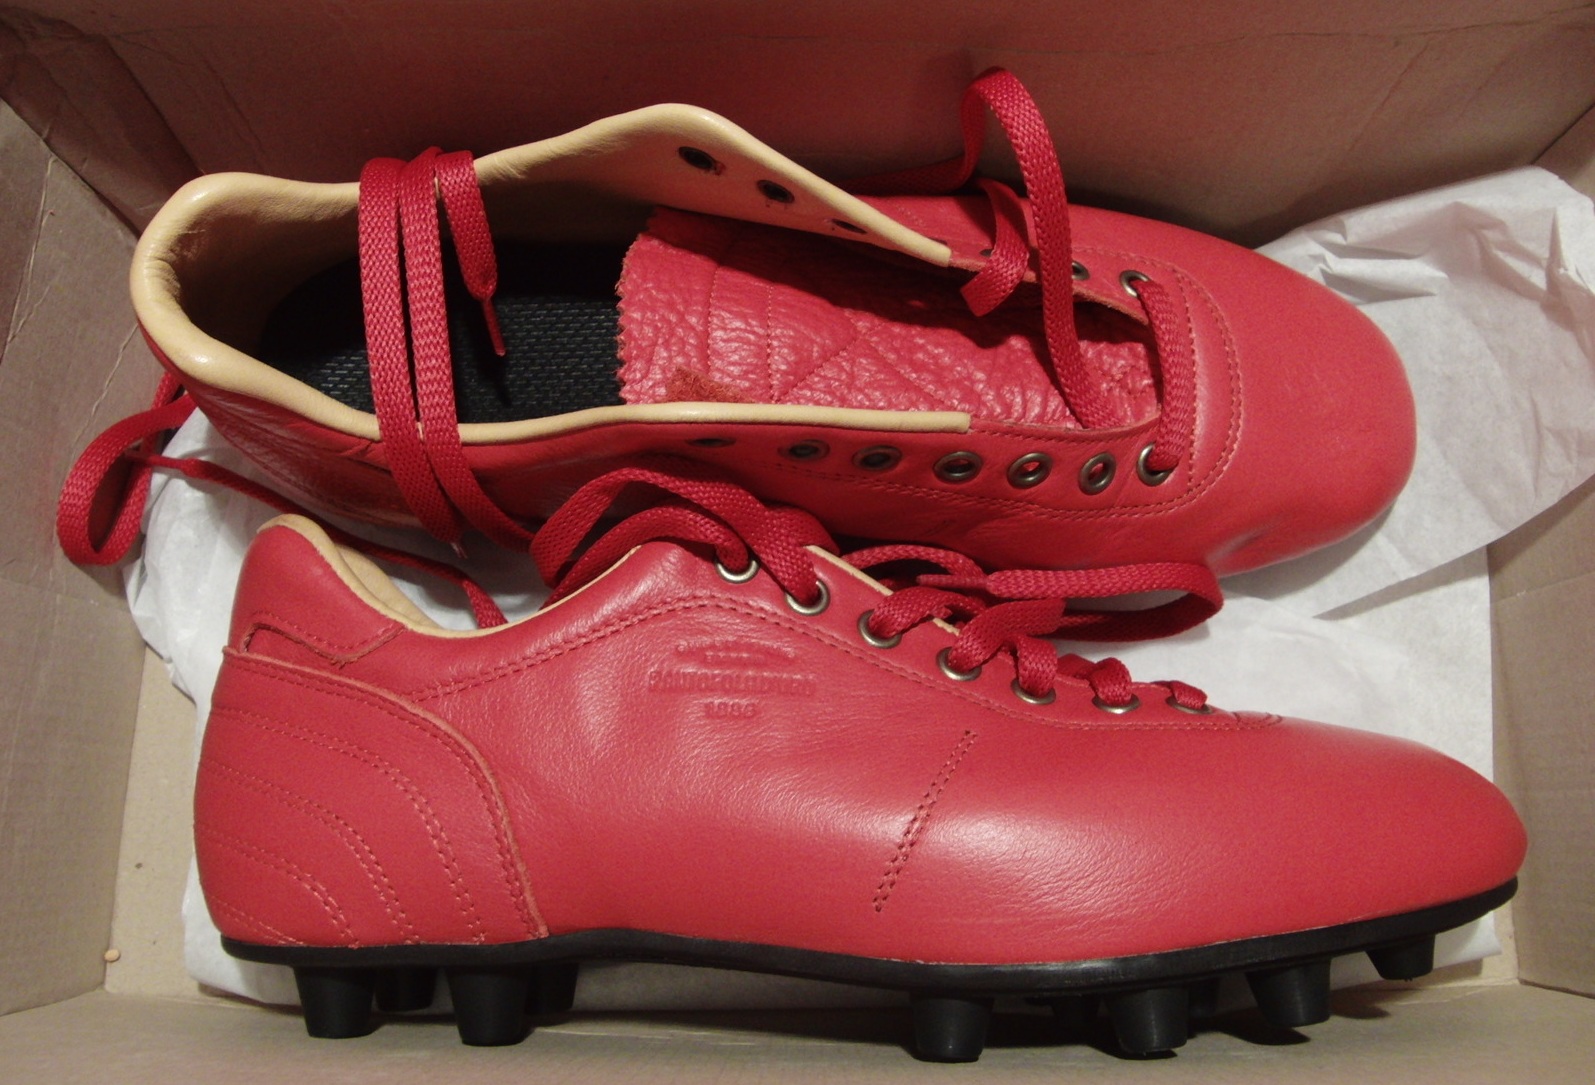 Just Arrived: Pantofola d’Oro and Mizuno Morelia | Soccer Cleats 101